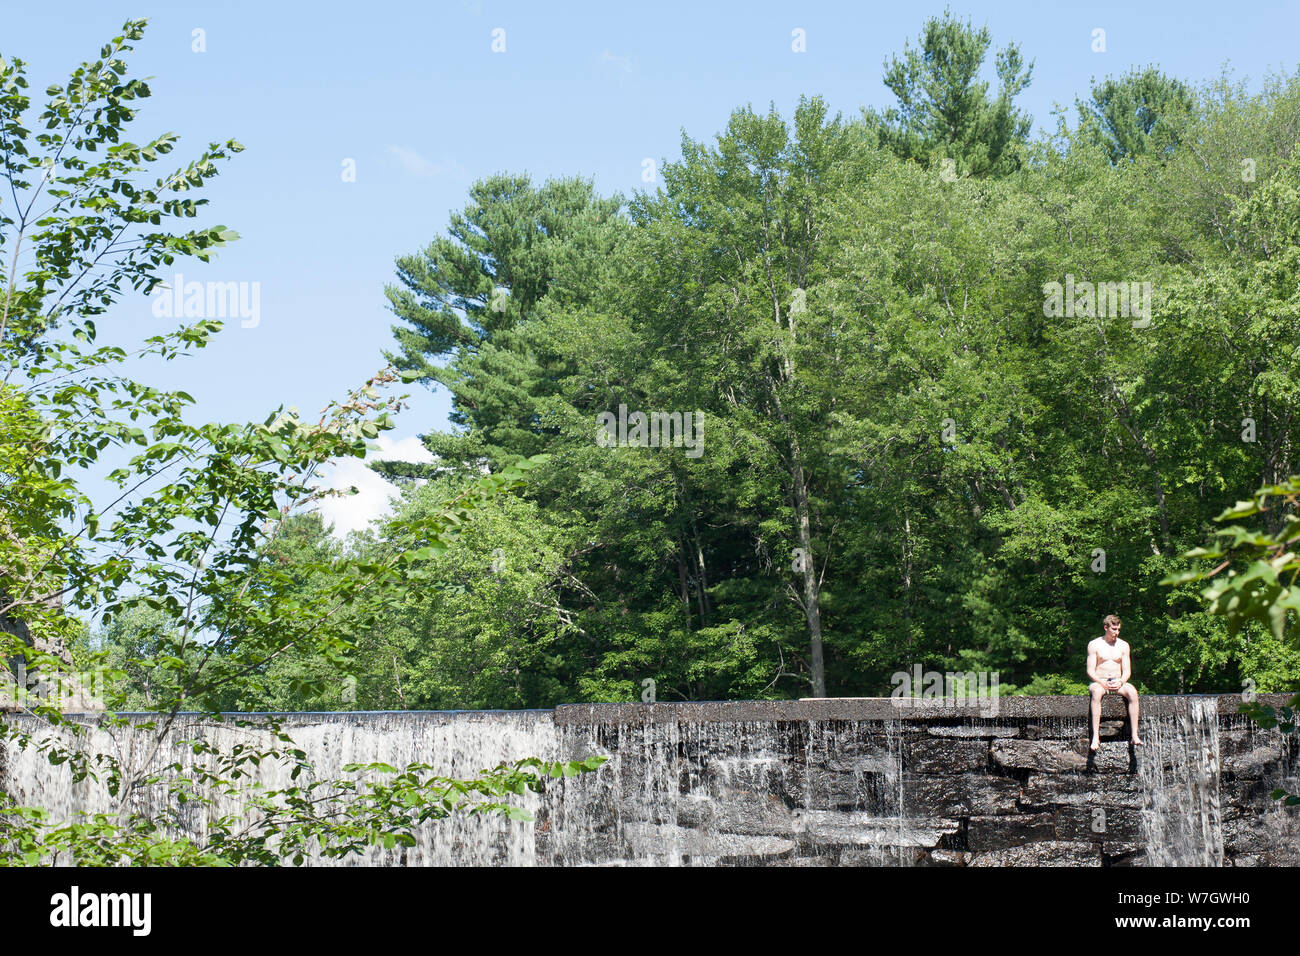 Water spills over dam at Puffer Pond in Amherst, Massachusetts Stock Photo